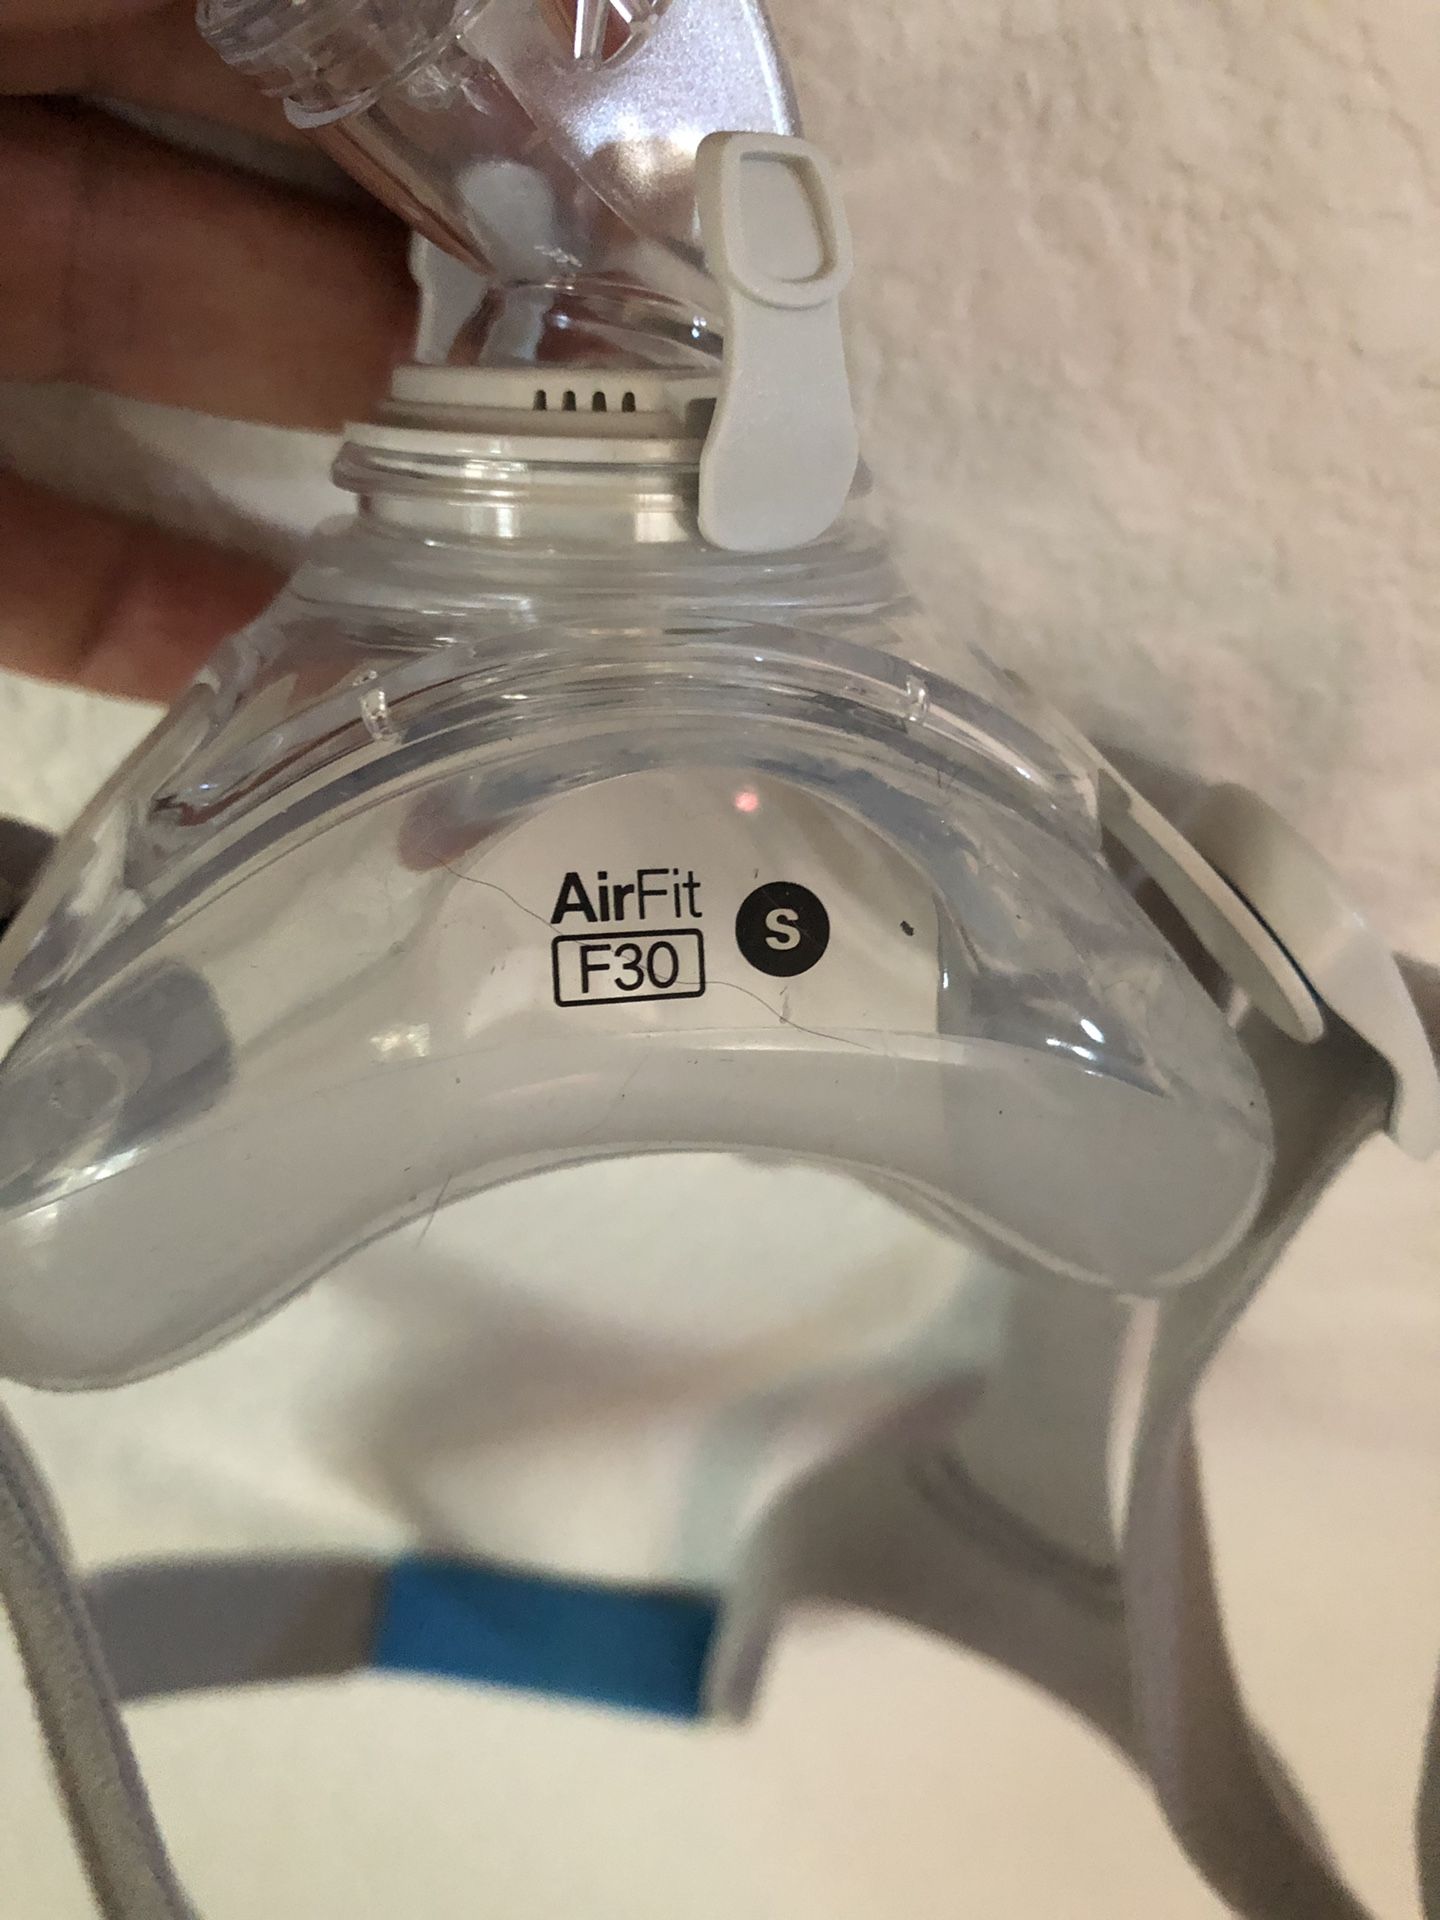 ResMed AirFit F30 CPAP Mask and headgear